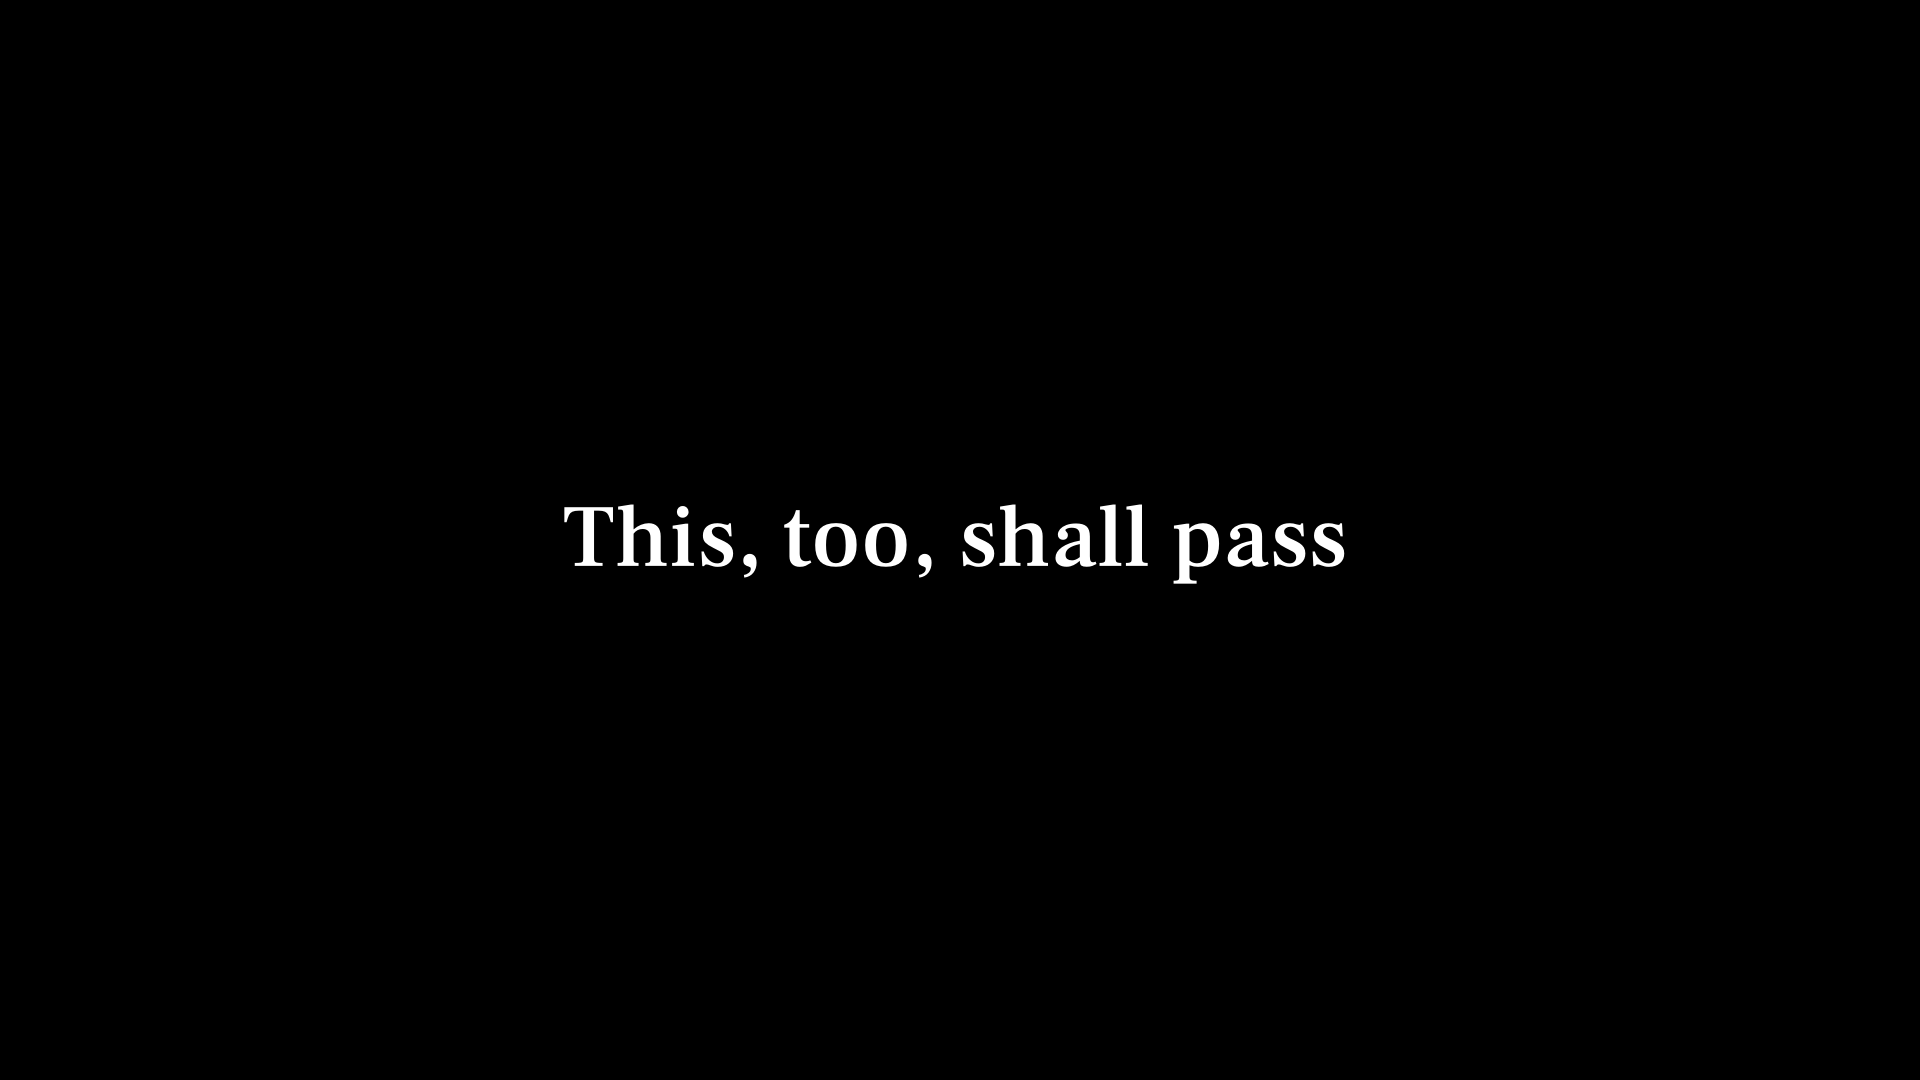 This, Too, Shall Pass